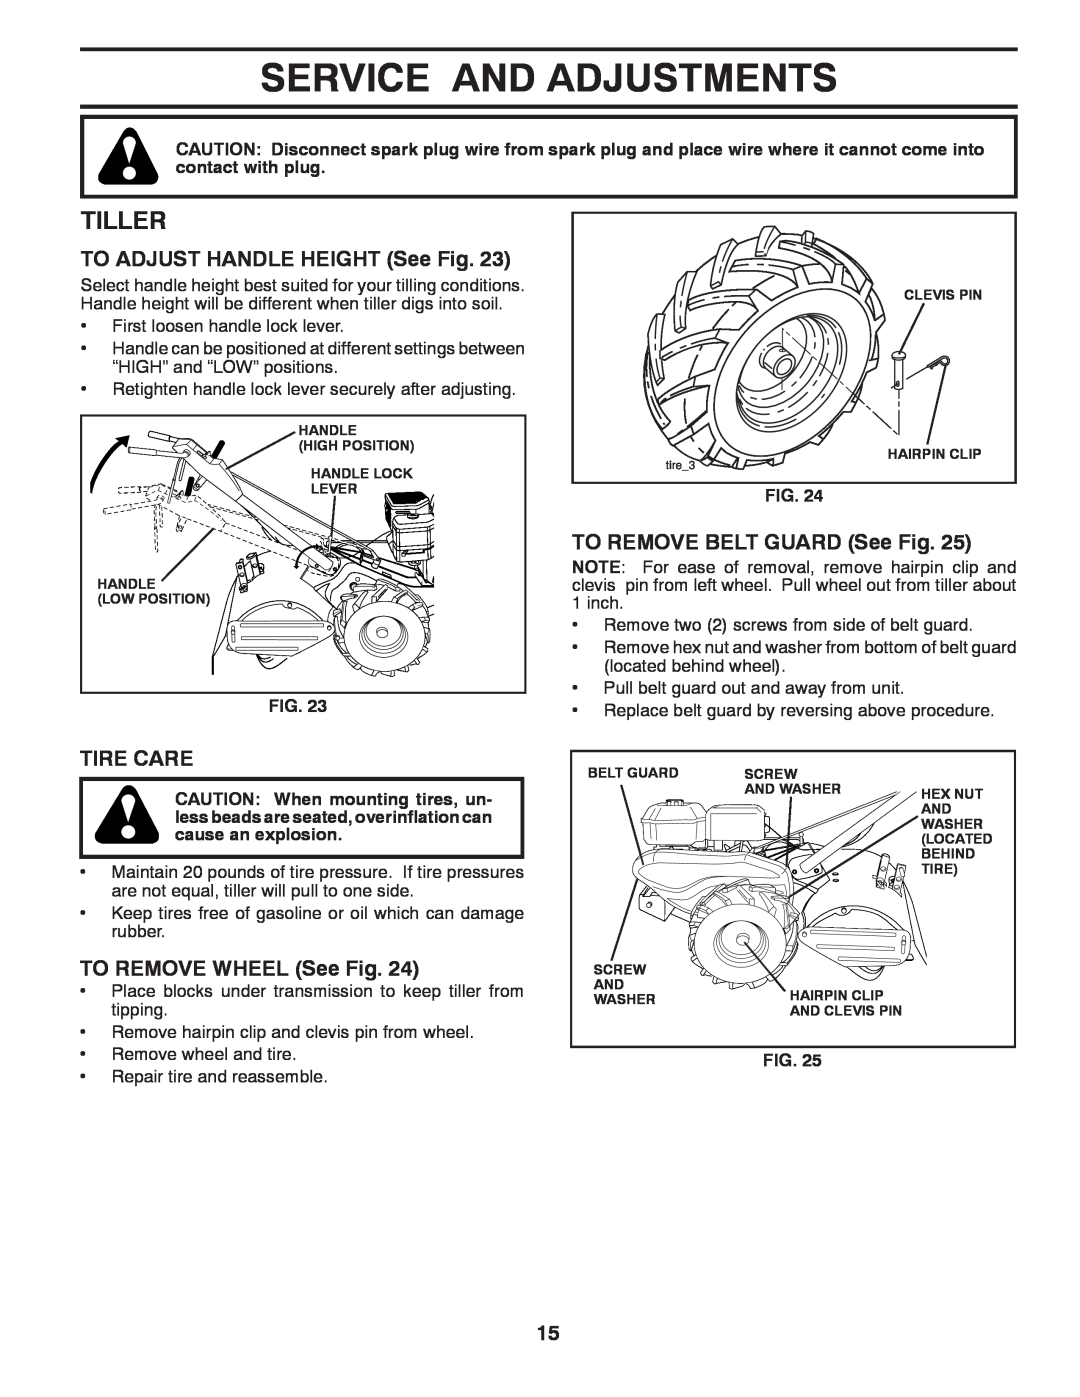 Husqvarna DRT70 Service And Adjustments, Tiller, TO ADJUST HANDLE HEIGHT See Fig, Tire Care, TO REMOVE WHEEL See Fig 